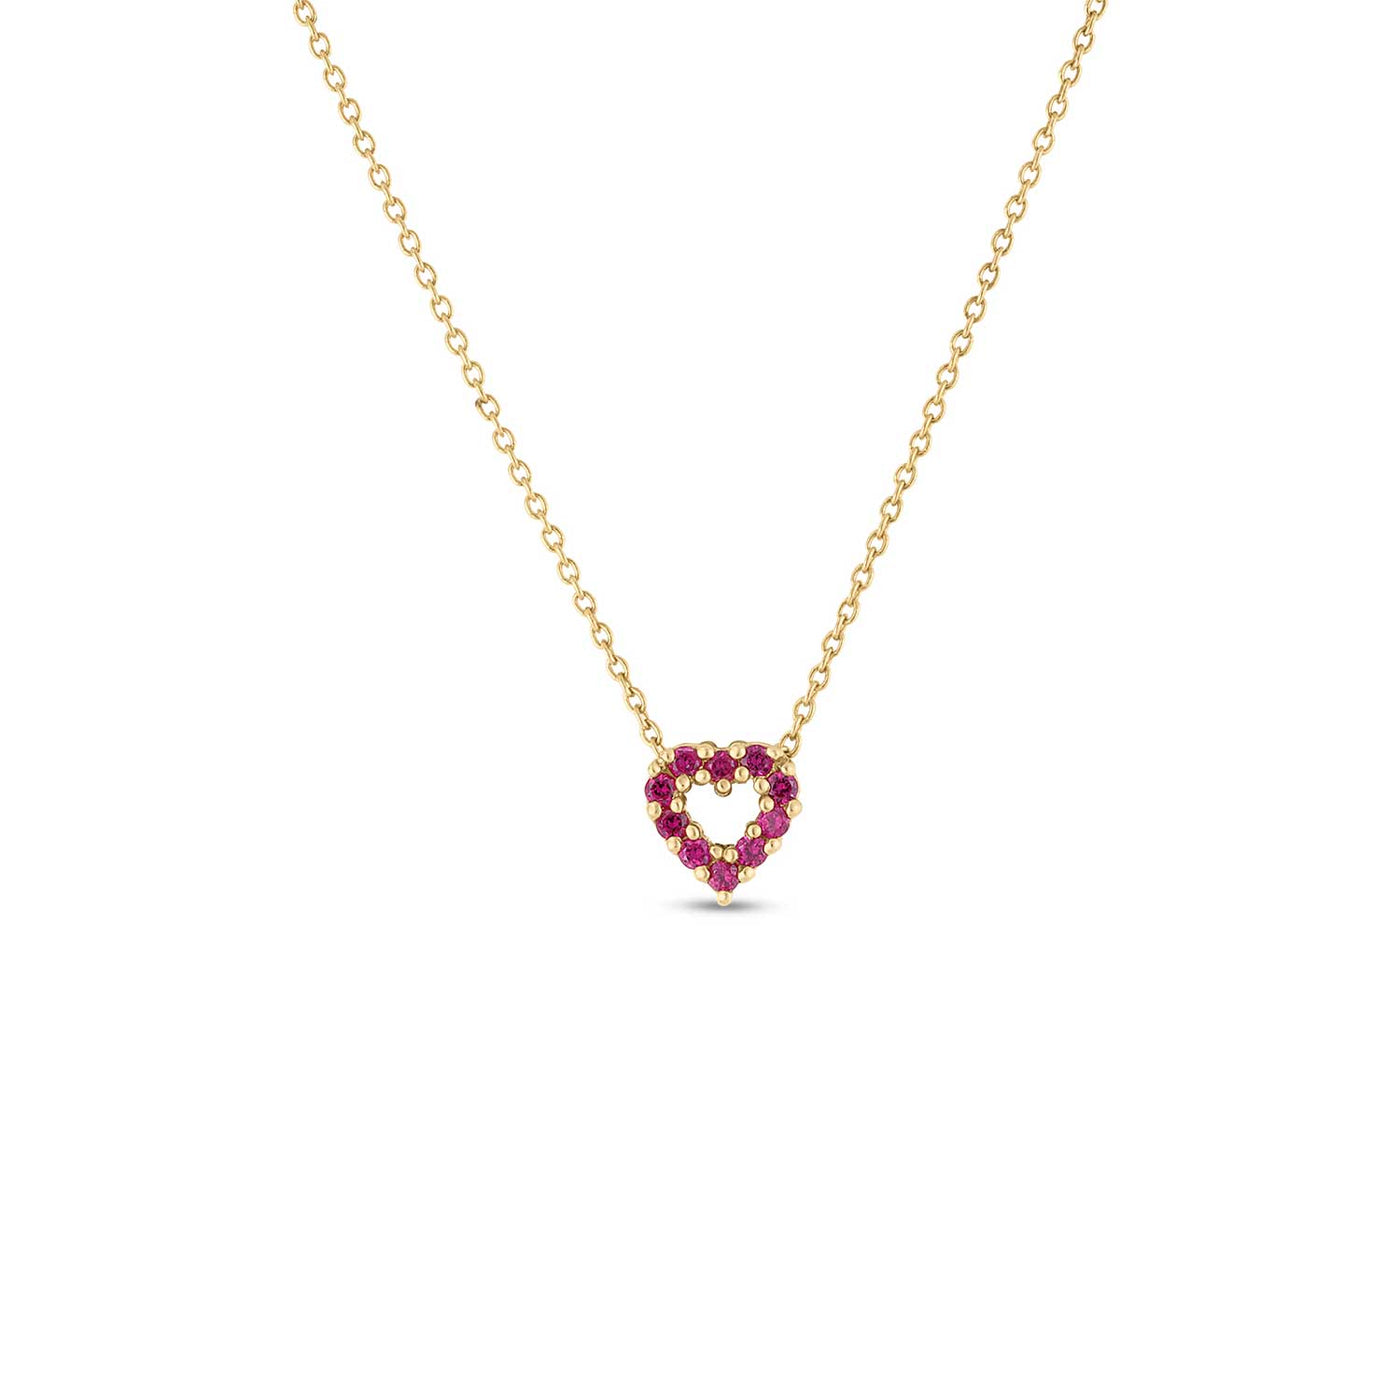 Roberto Coin 18k White Gold Tiny Treasures Diamond and Rubies Open Heart Pendant Necklace – 000634AWCHXPS